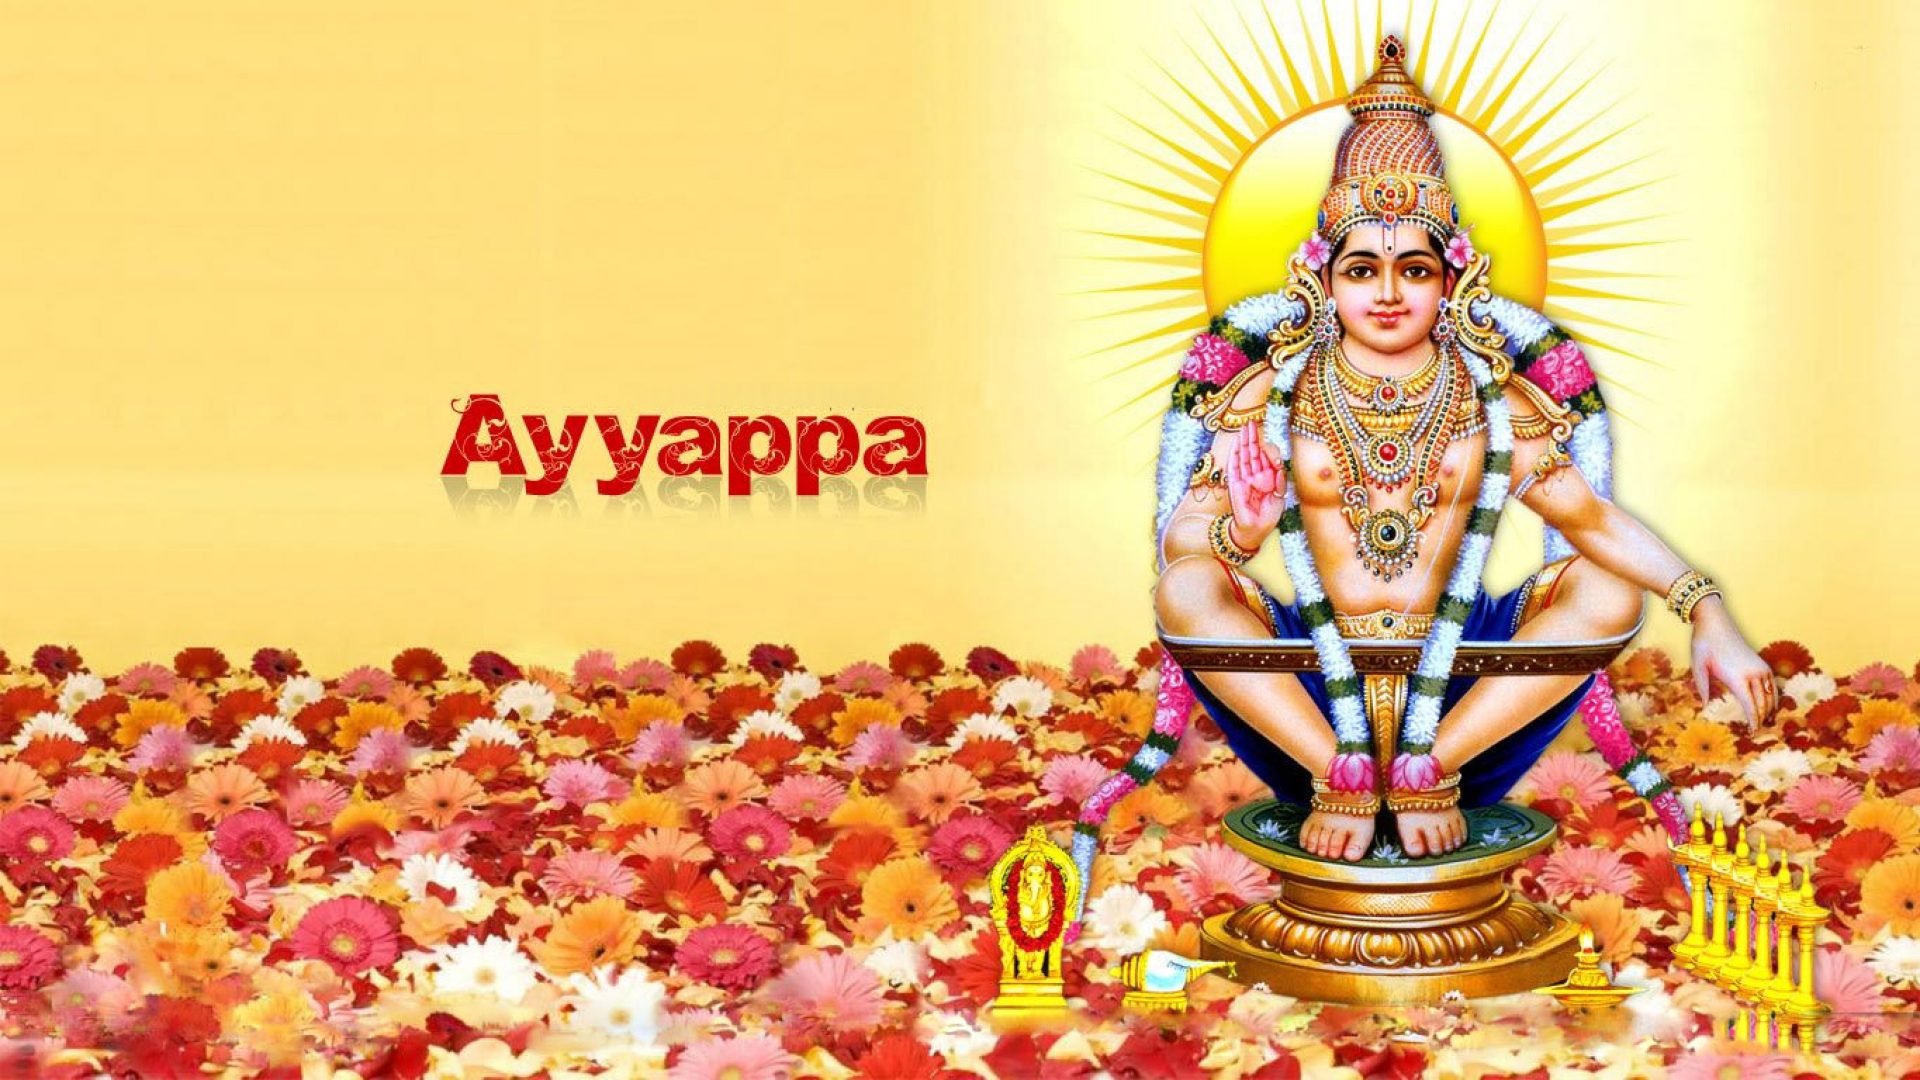 Ayyappa Swamy Hd Images Free Download - God HD Wallpapers